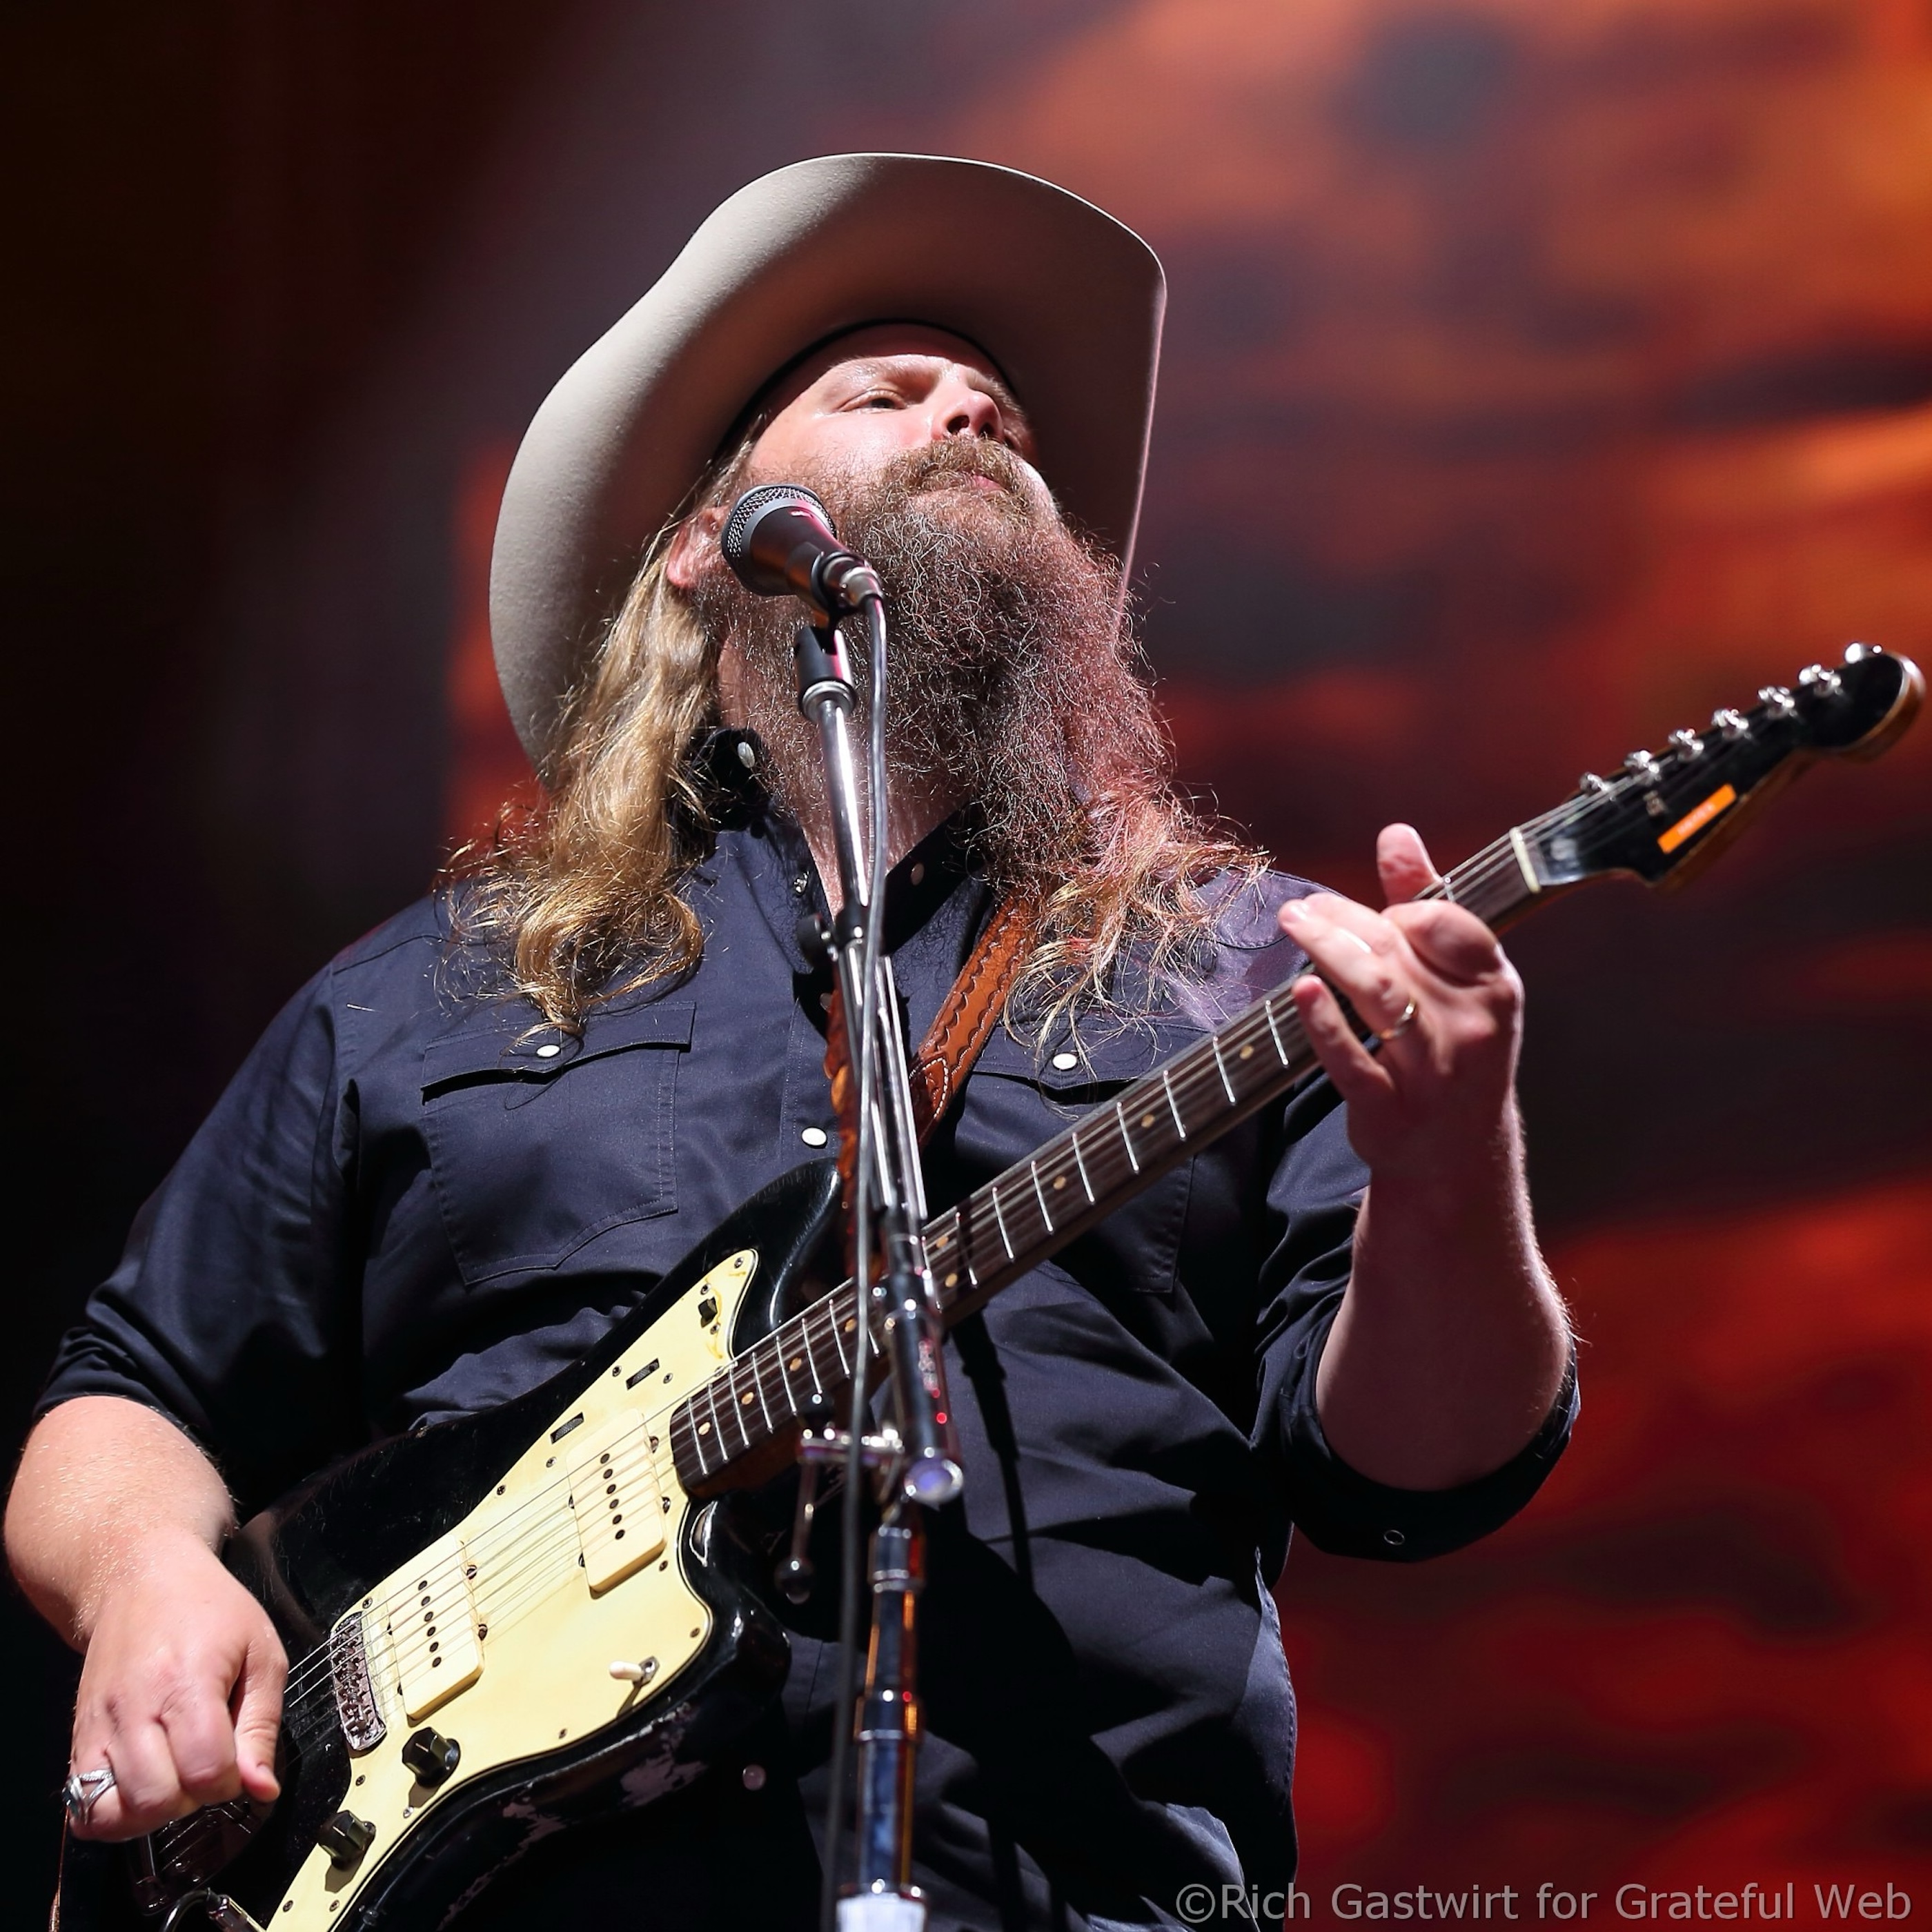 CHRIS STAPLETON NOMINATED FOR FIVE AWARDS AT 59TH ANNUAL ACM AWARDS 